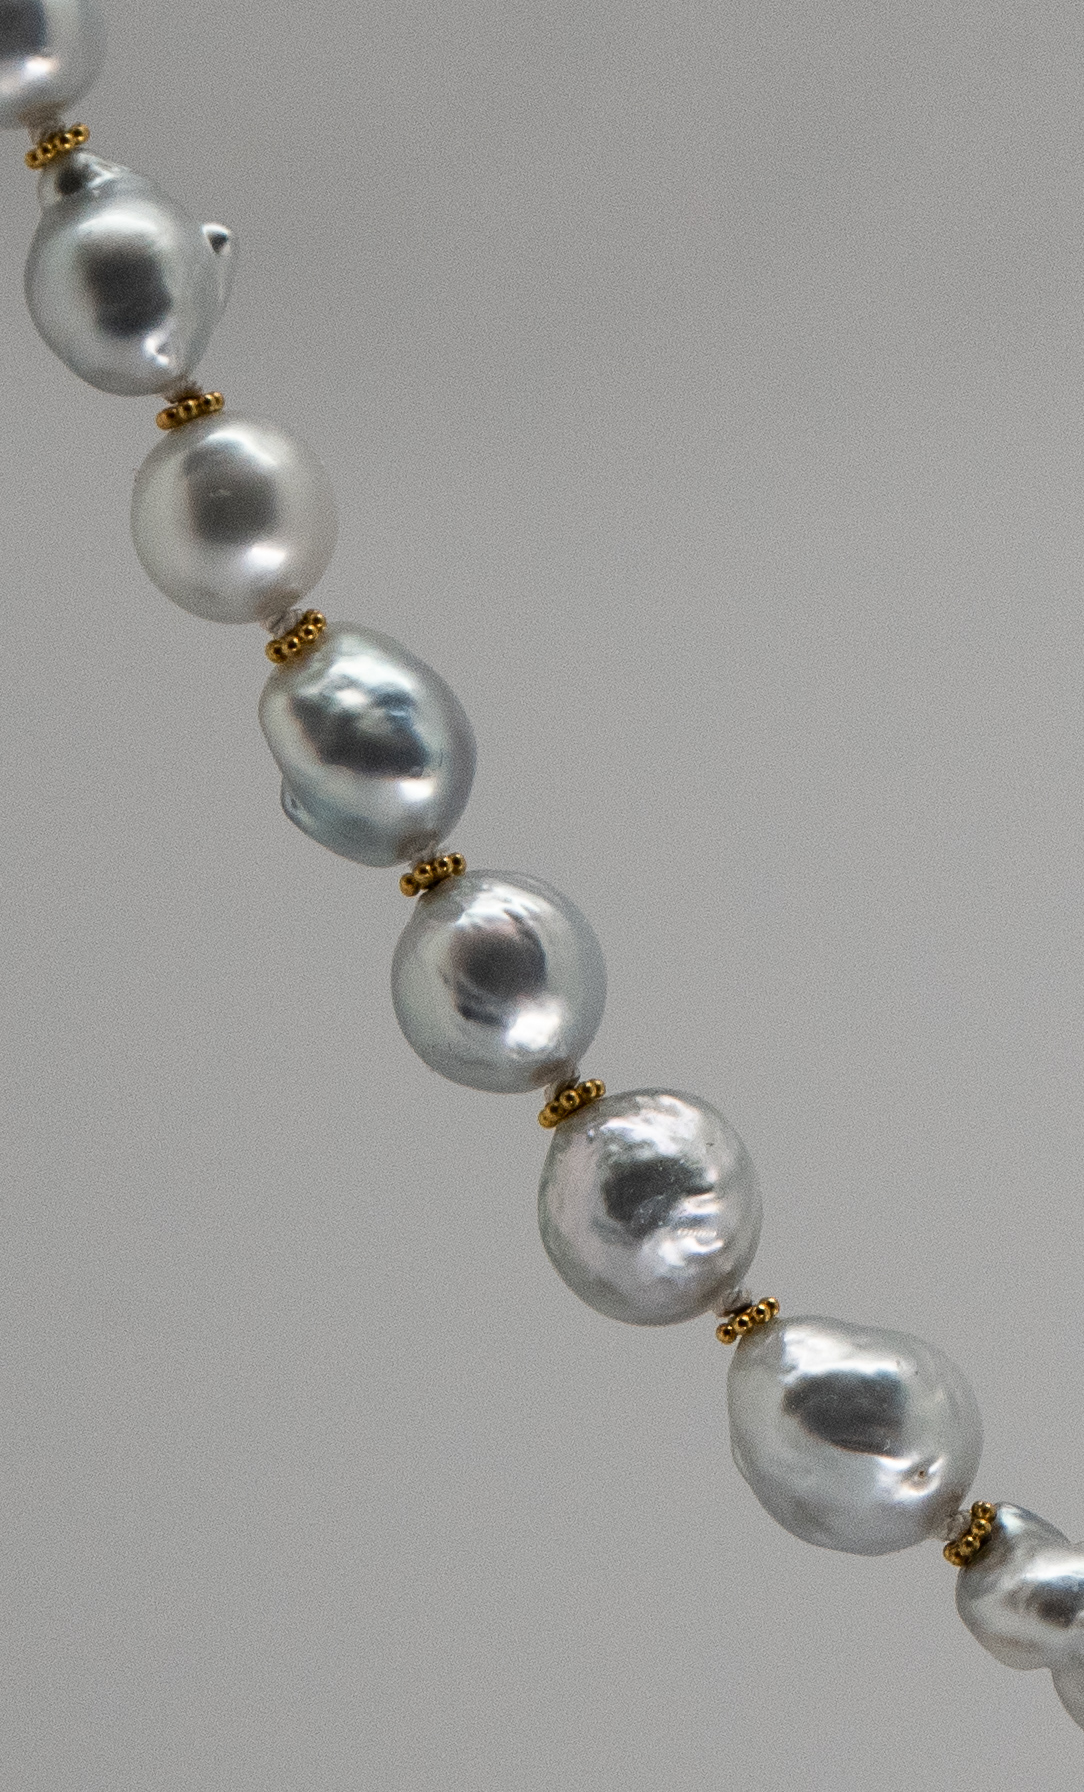 detail of south sea pearl necklace showing knotting and 22K gold spacers